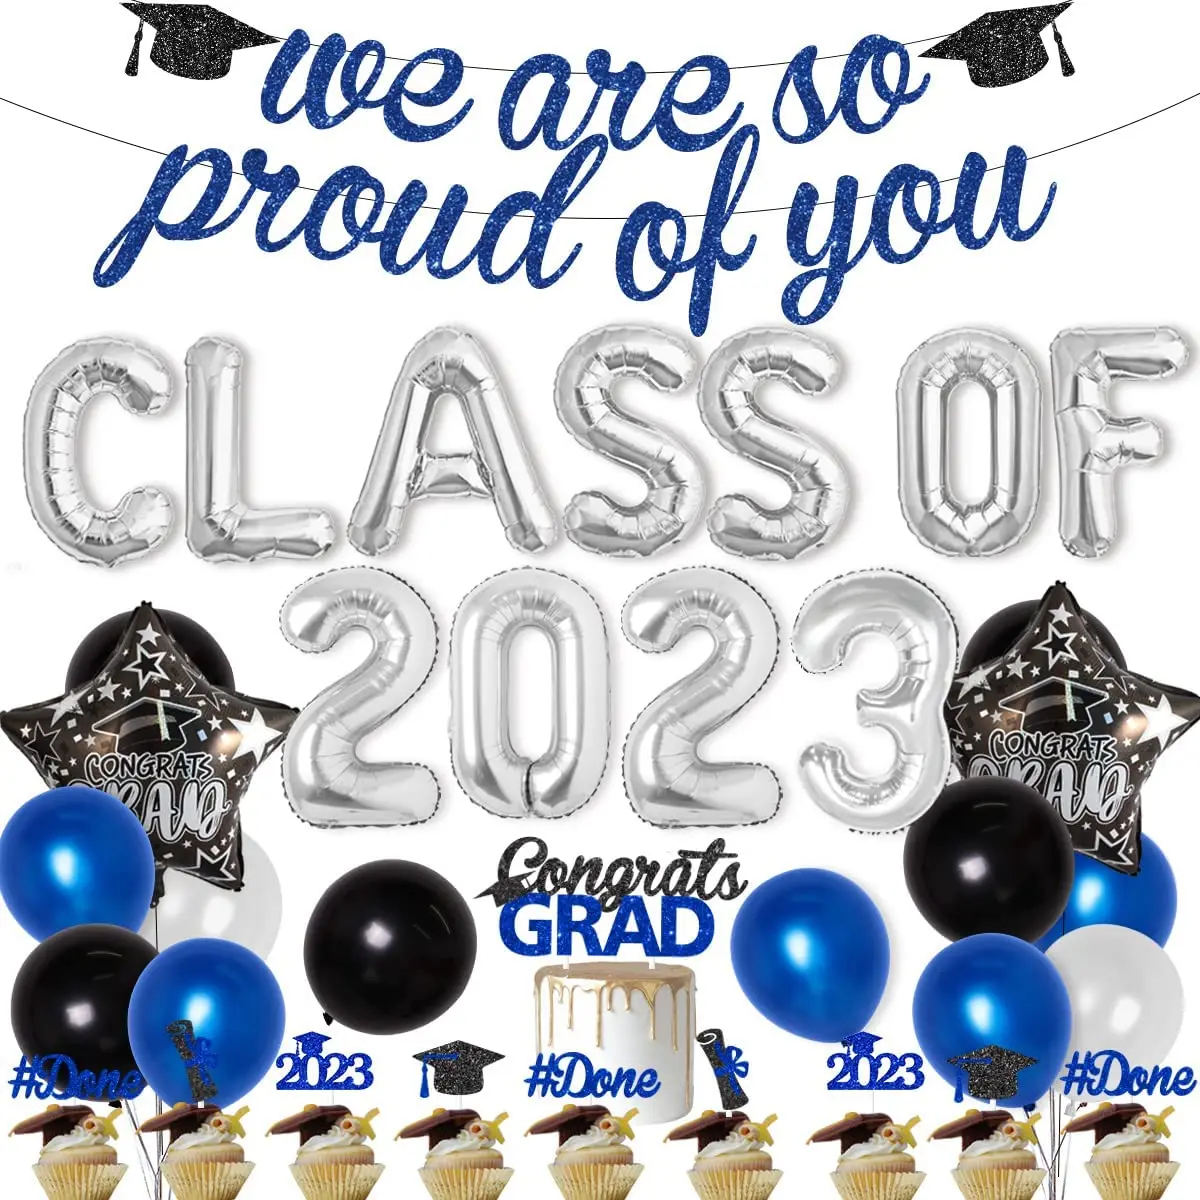 

Funmemoir Blue Sliver Graduation Decorations Class of 2023 Party Supplies We Are So Proud of You Banner Congrats Grad Balloons